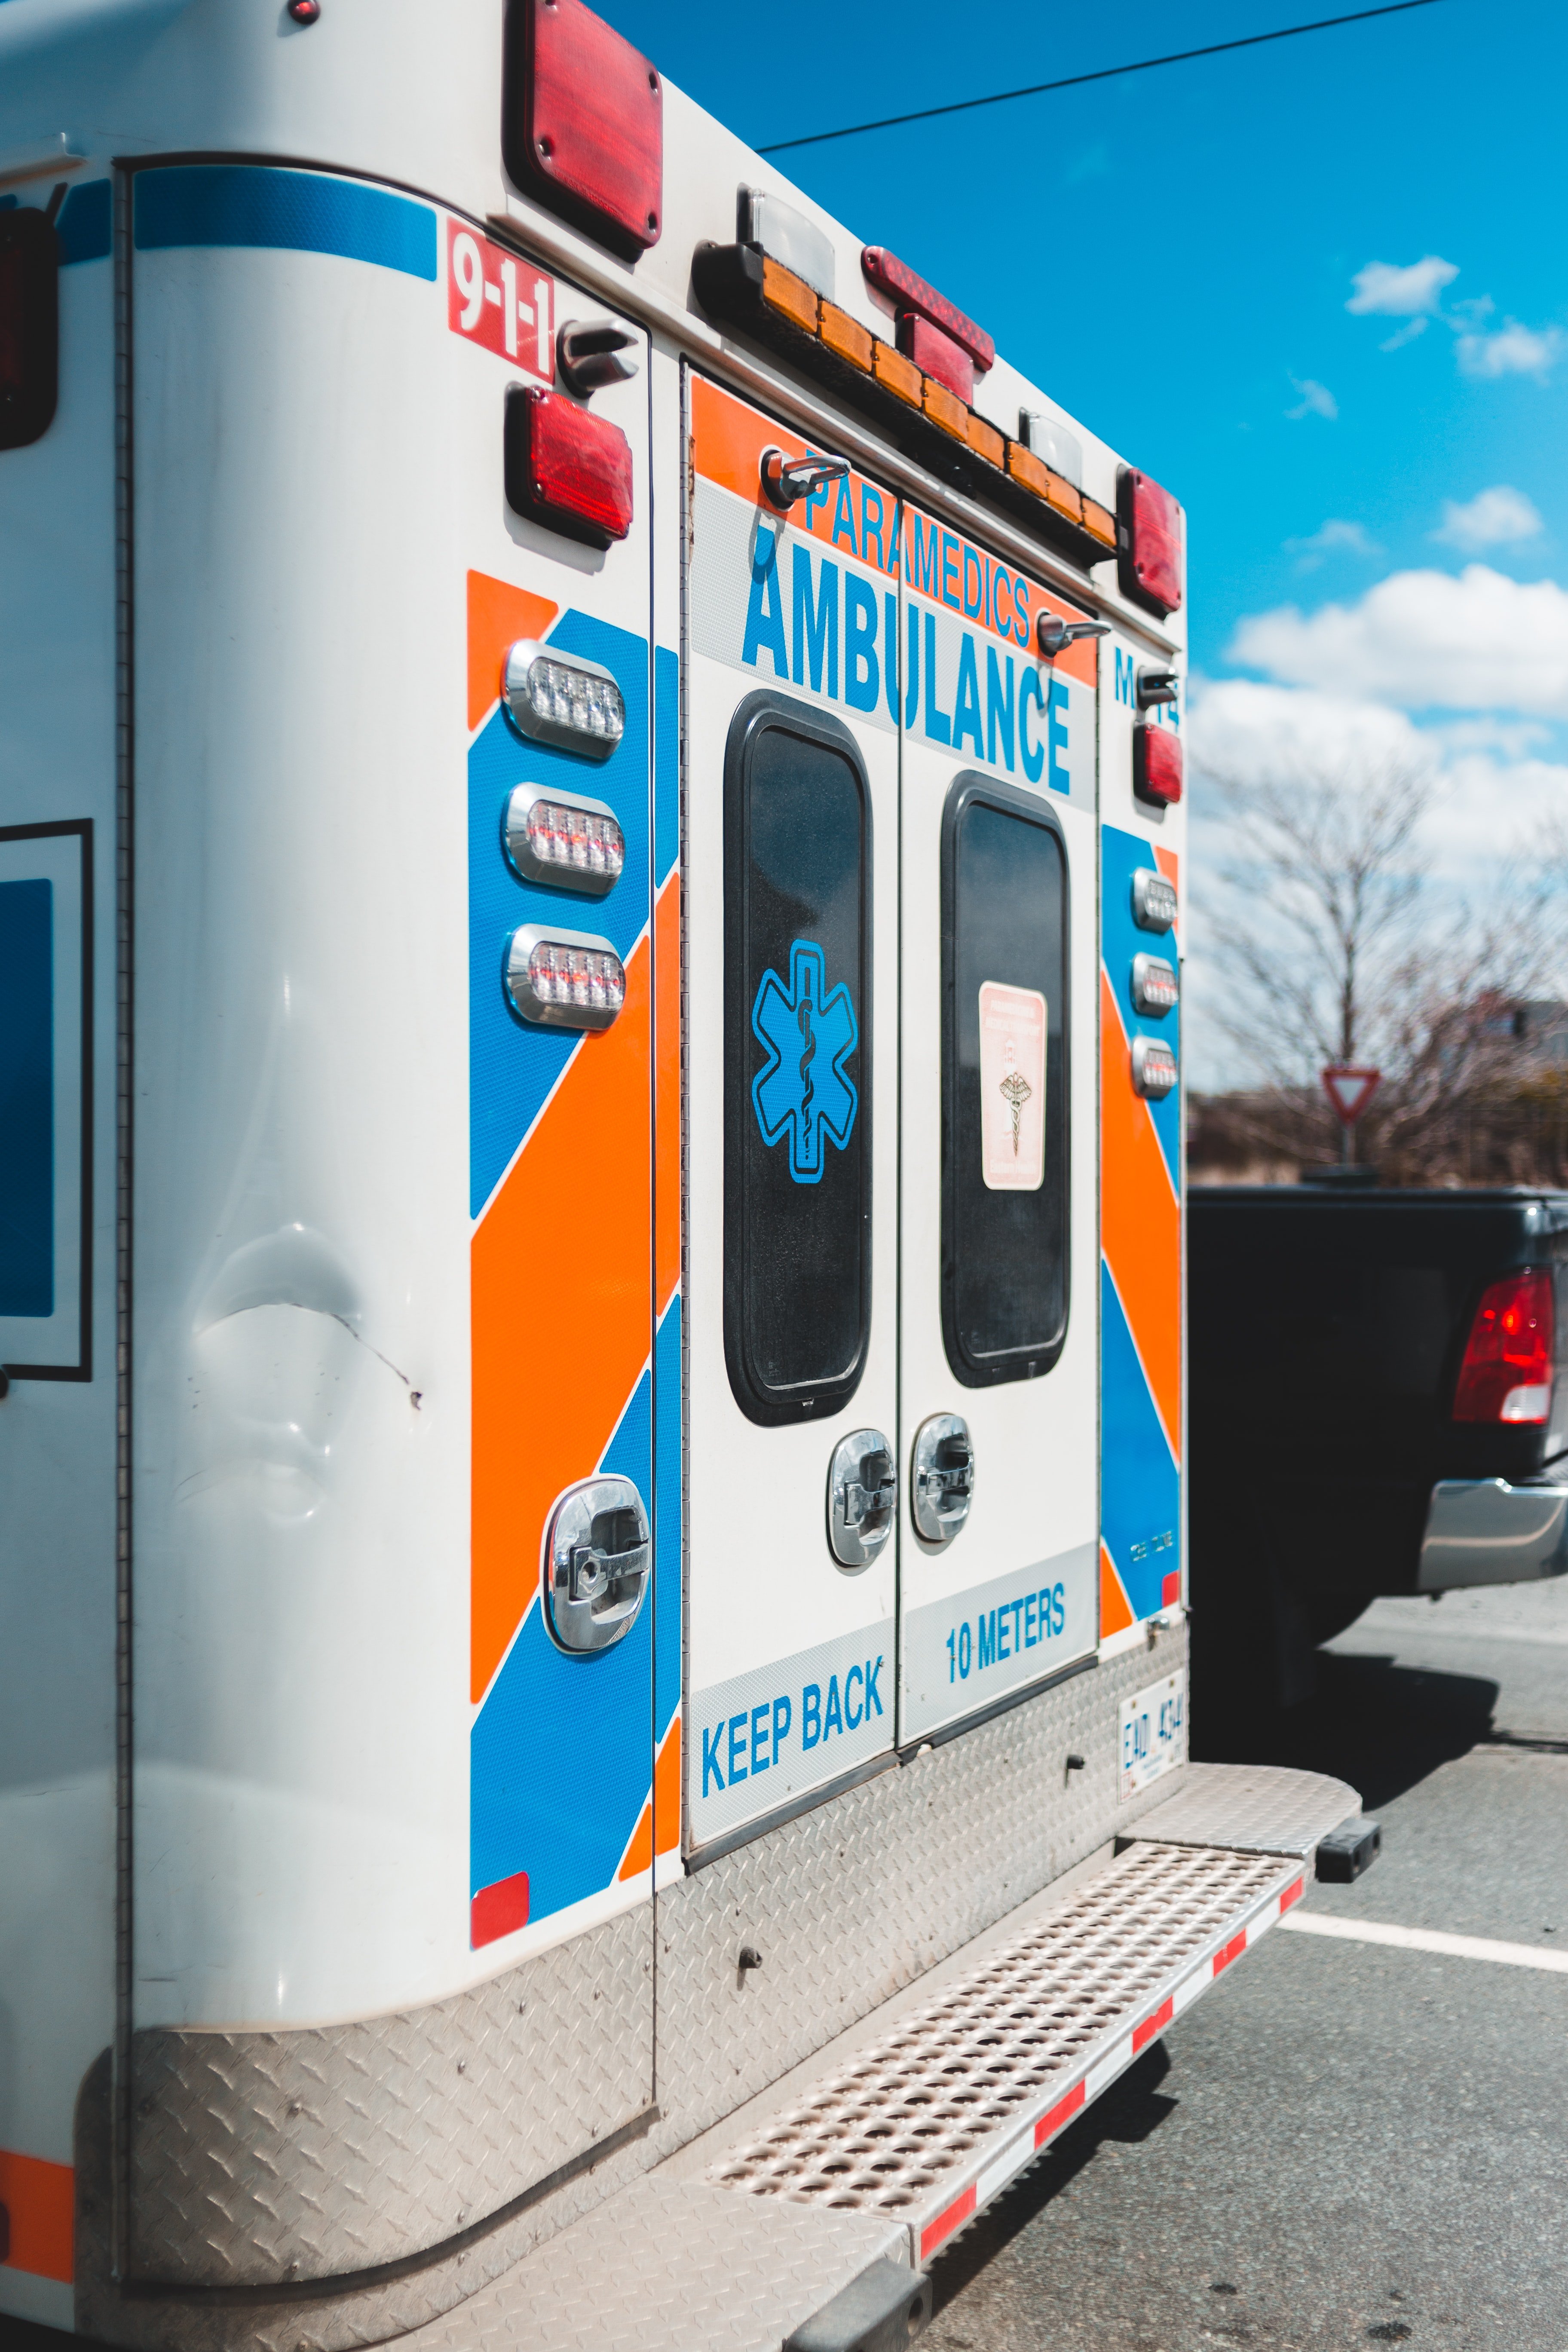 An ambulance parked in front of his house. | Source: Unsplash